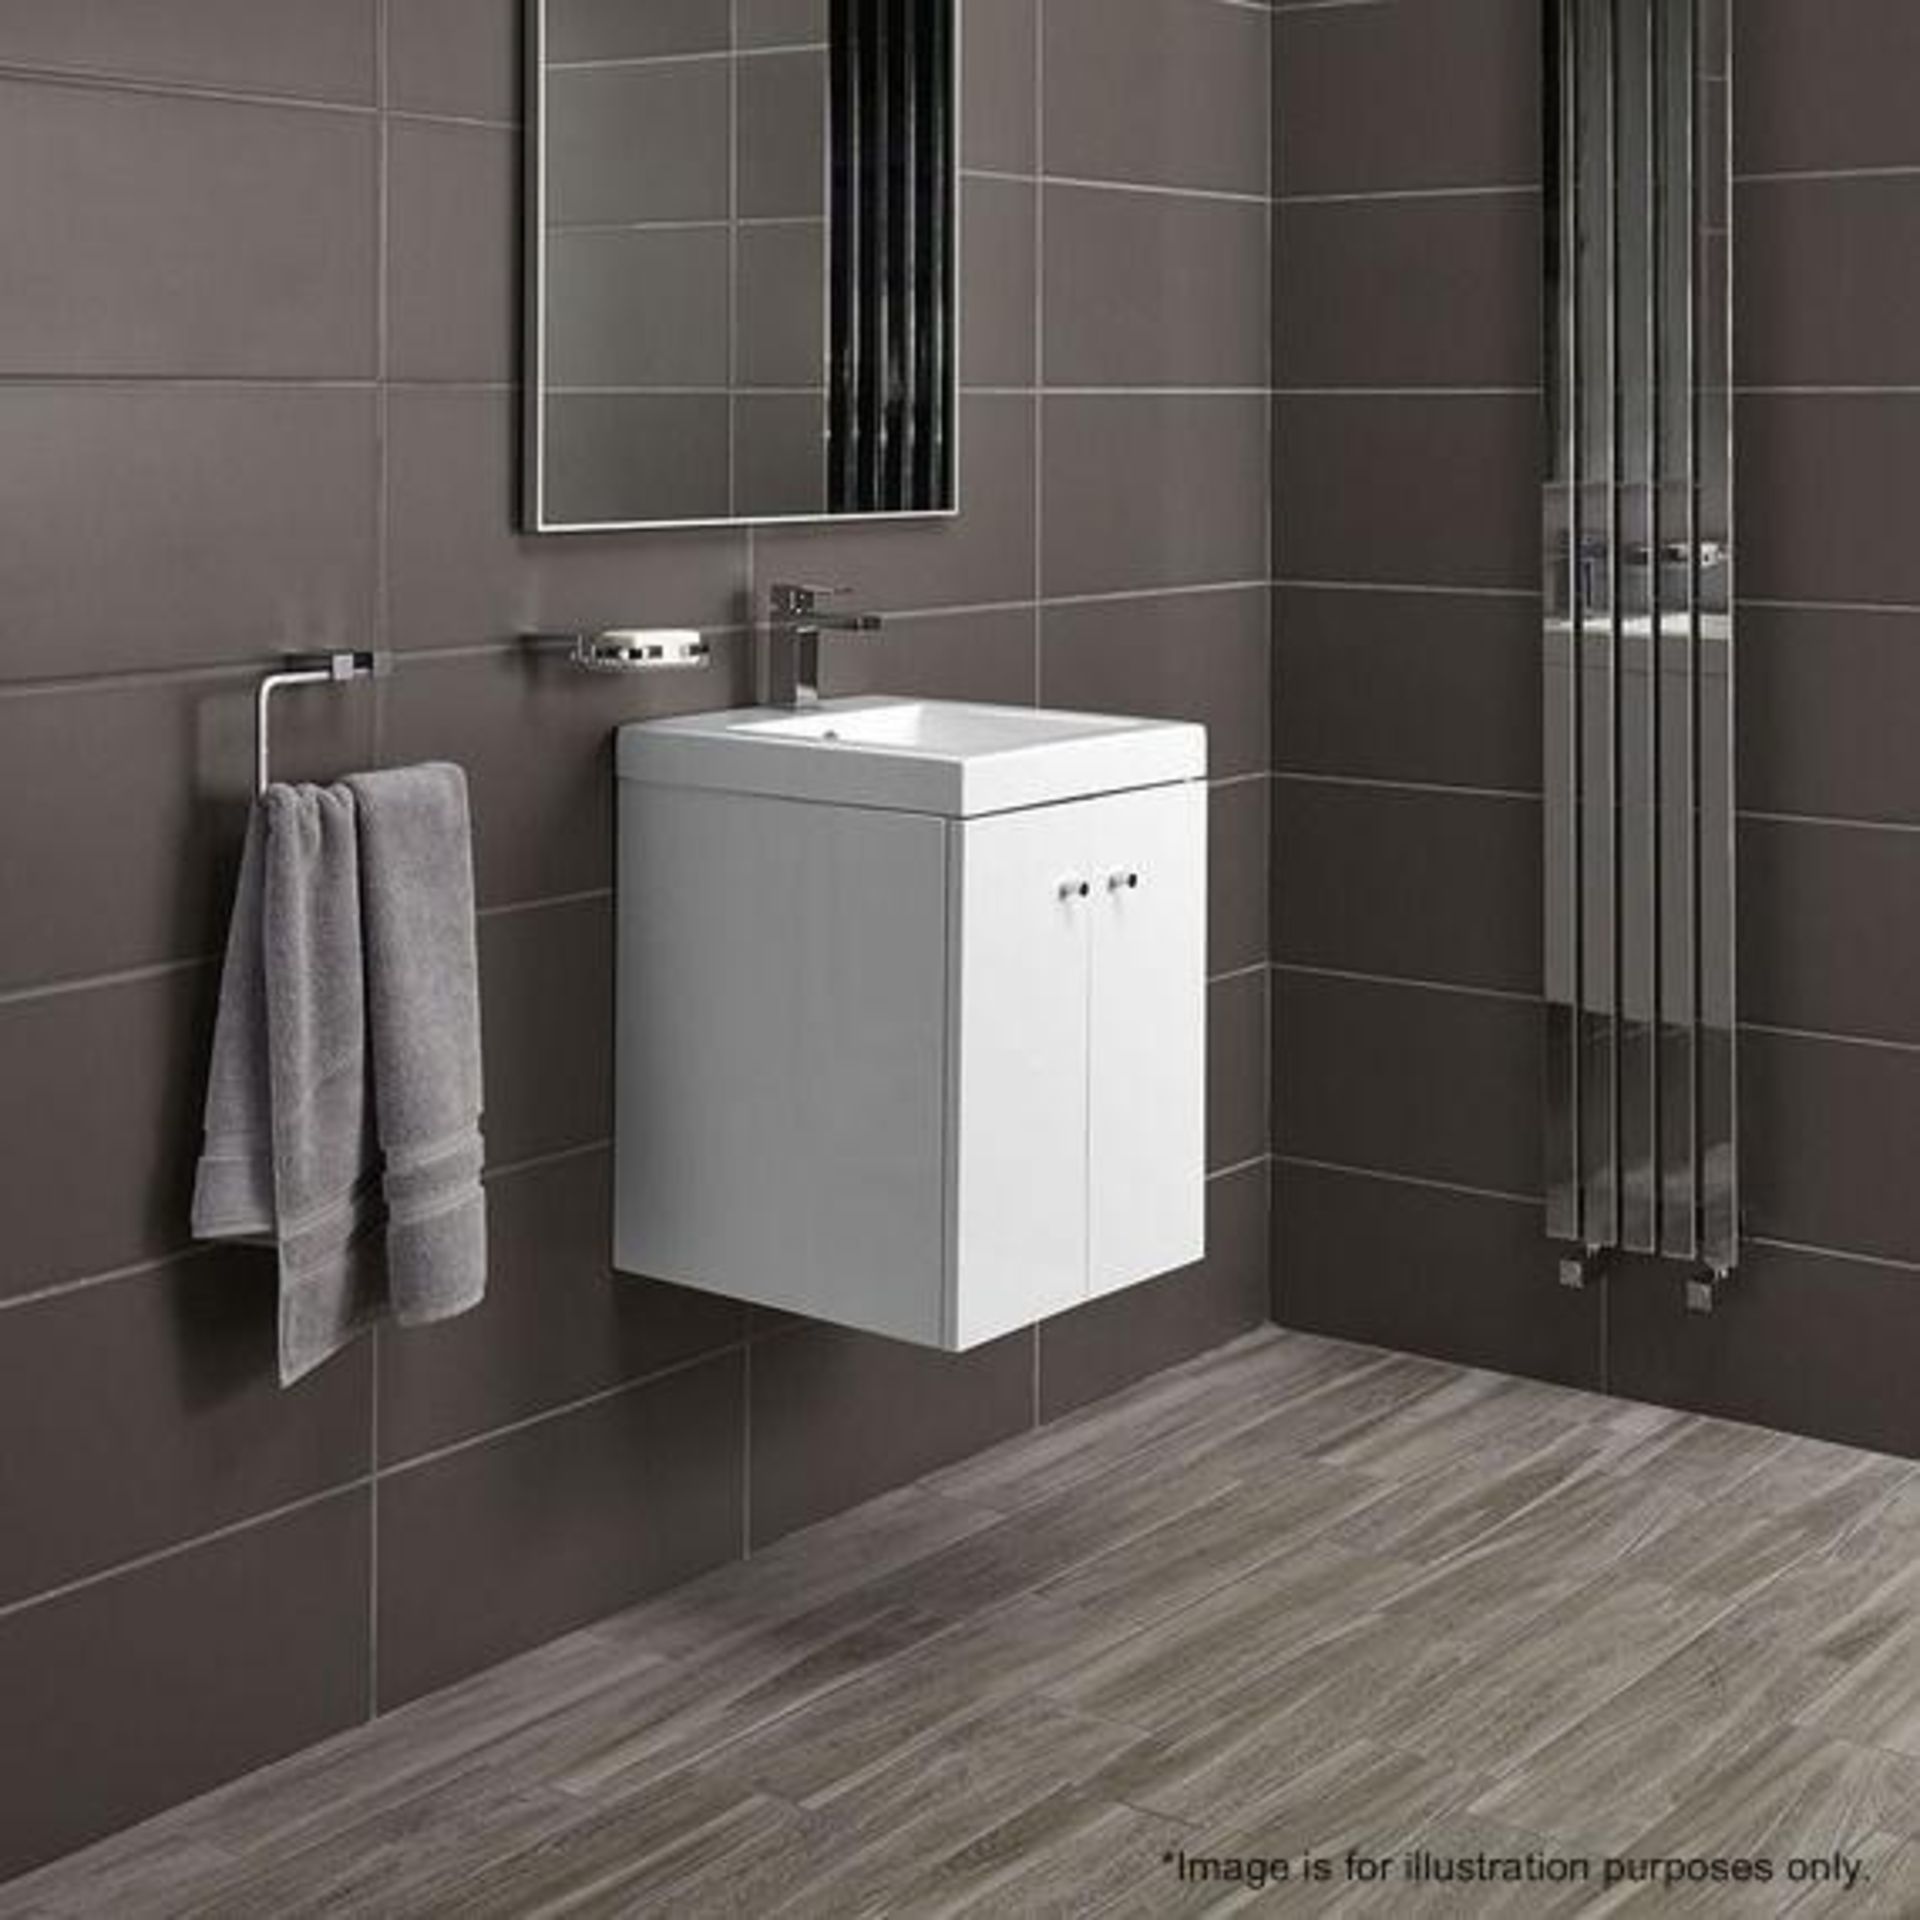 5 x Alpine Duo 400 Wall Hung Vanity Units In Gloss White - Brand New Boxed Stock - Dimensions: H49 x - Image 4 of 5